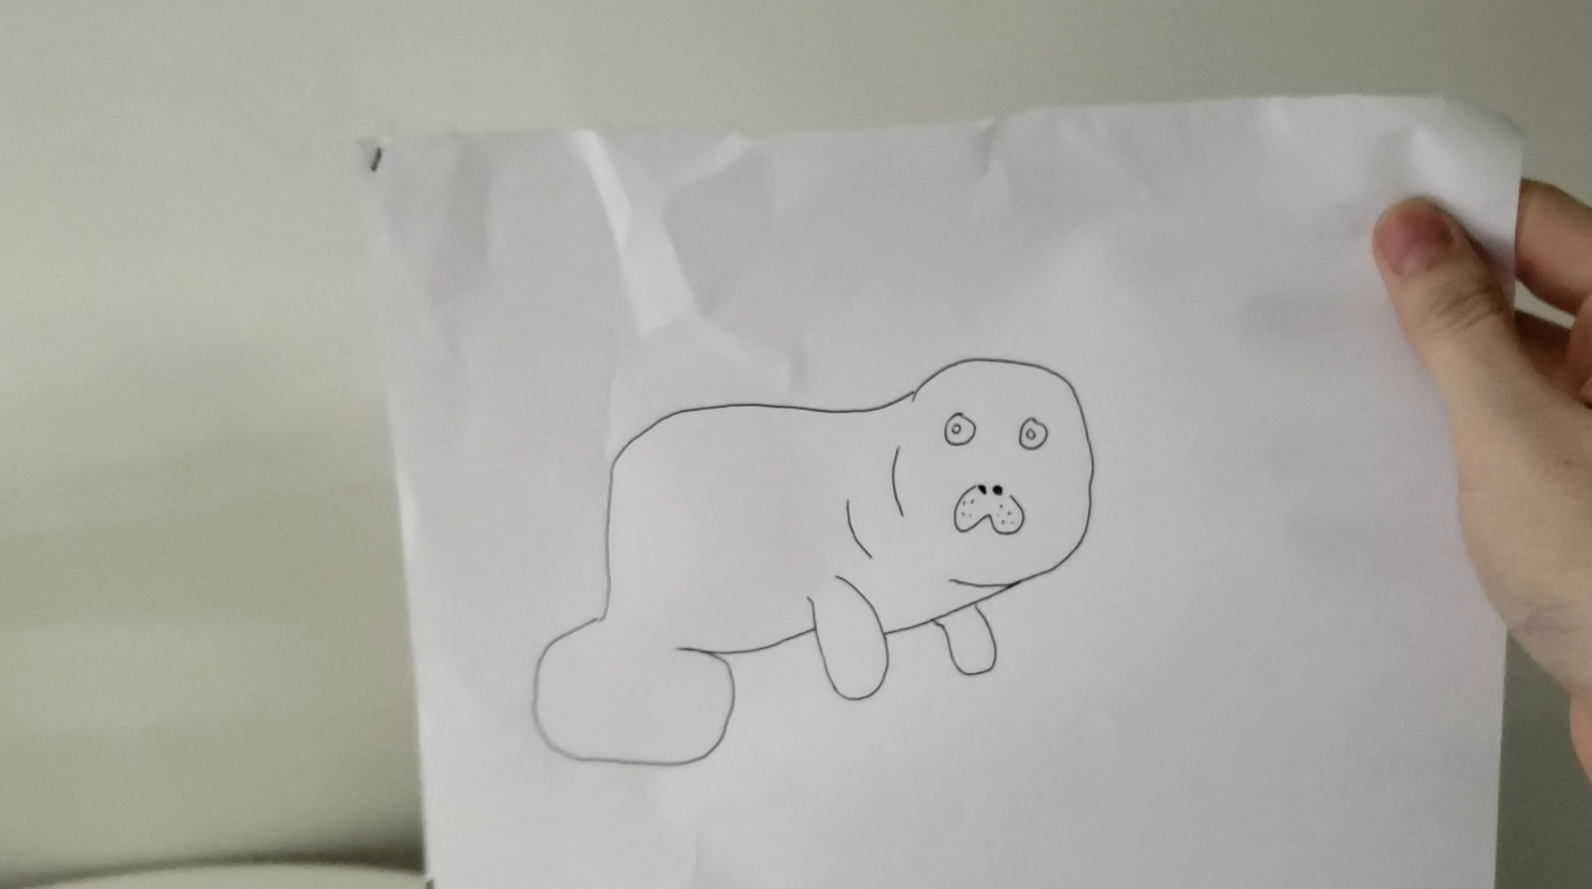 A dugong drawn on a sheet of paper